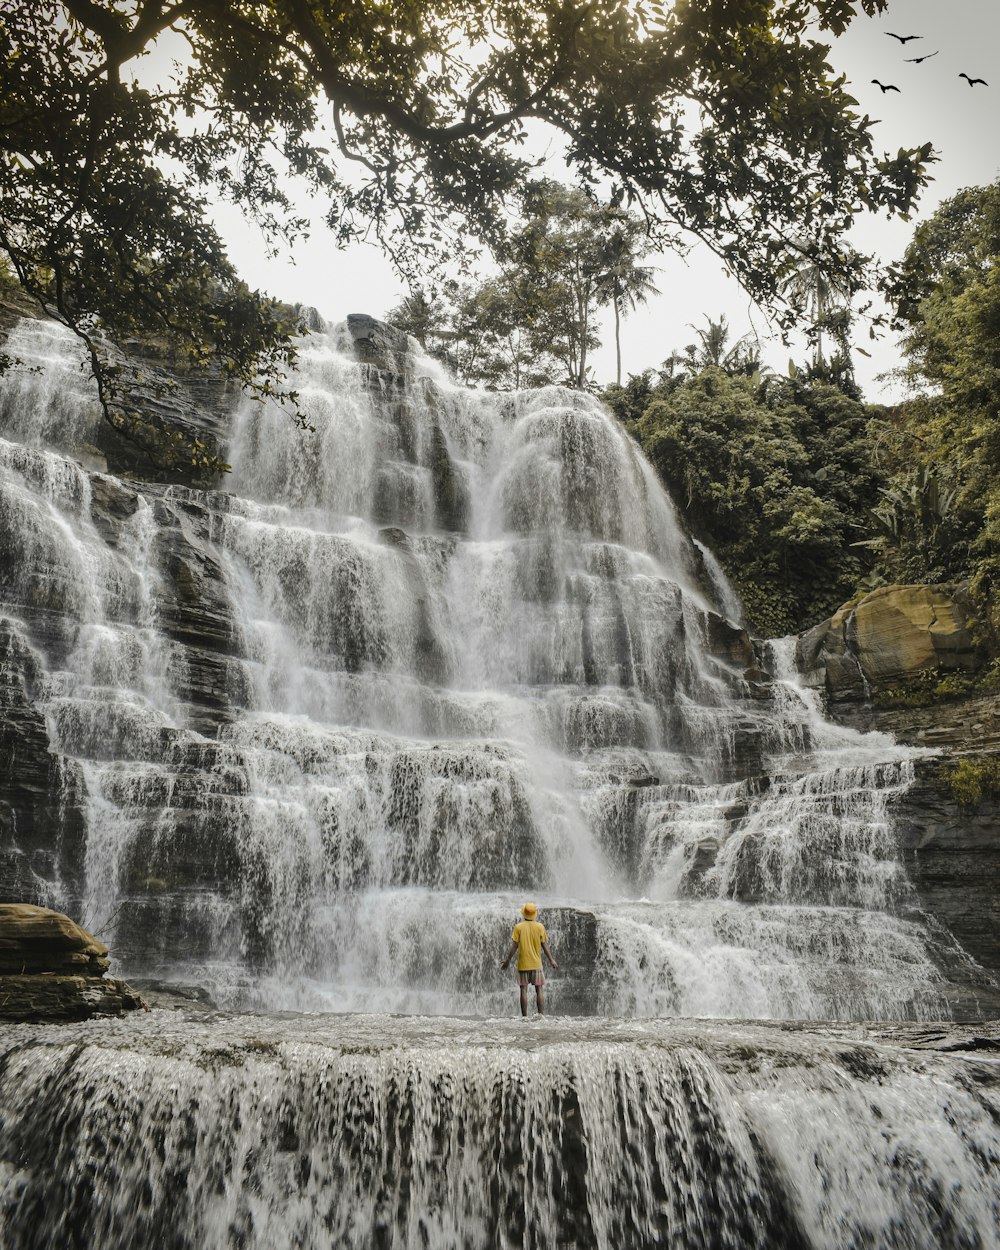 person in yellow jacket standing on rock near waterfalls during daytime